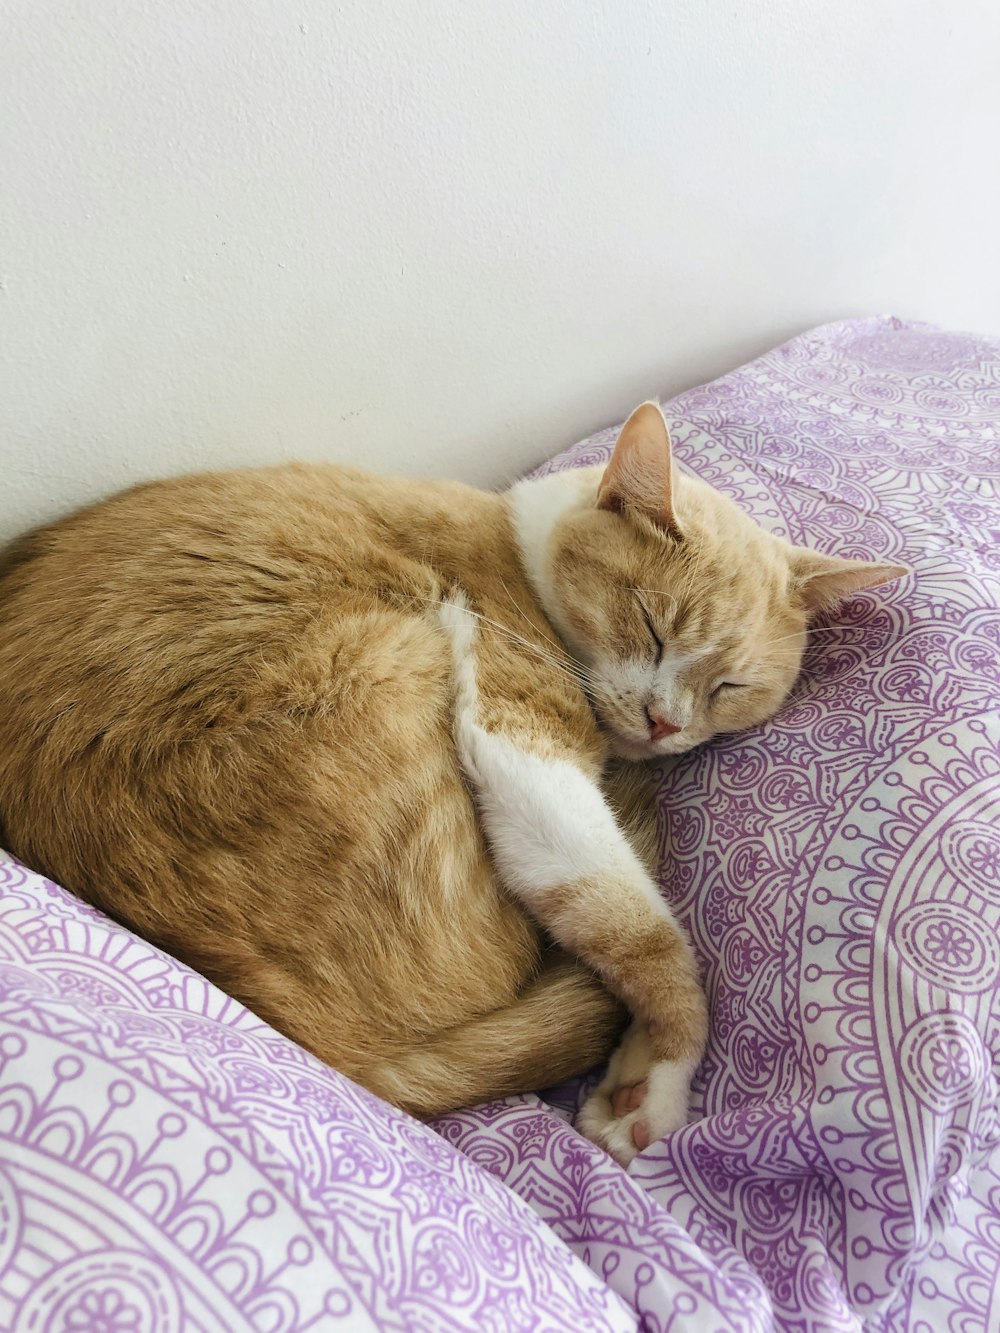 orange tabby cat lying on white and purple floral textile